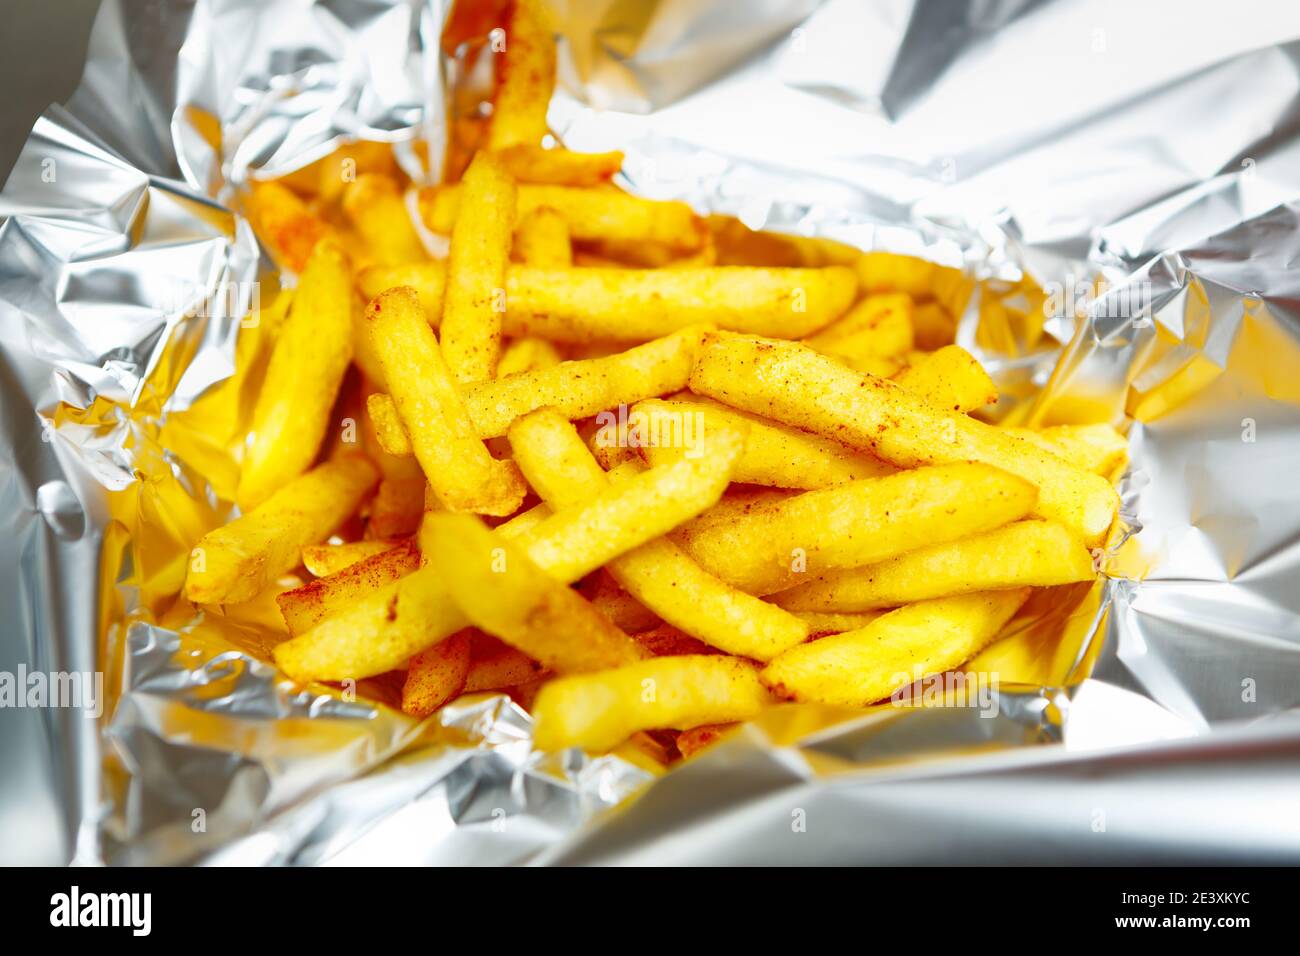 Golden French fries delivered in tinfoil for dinner.Delicious potato chips delivery from fast food restaurant Stock Photo